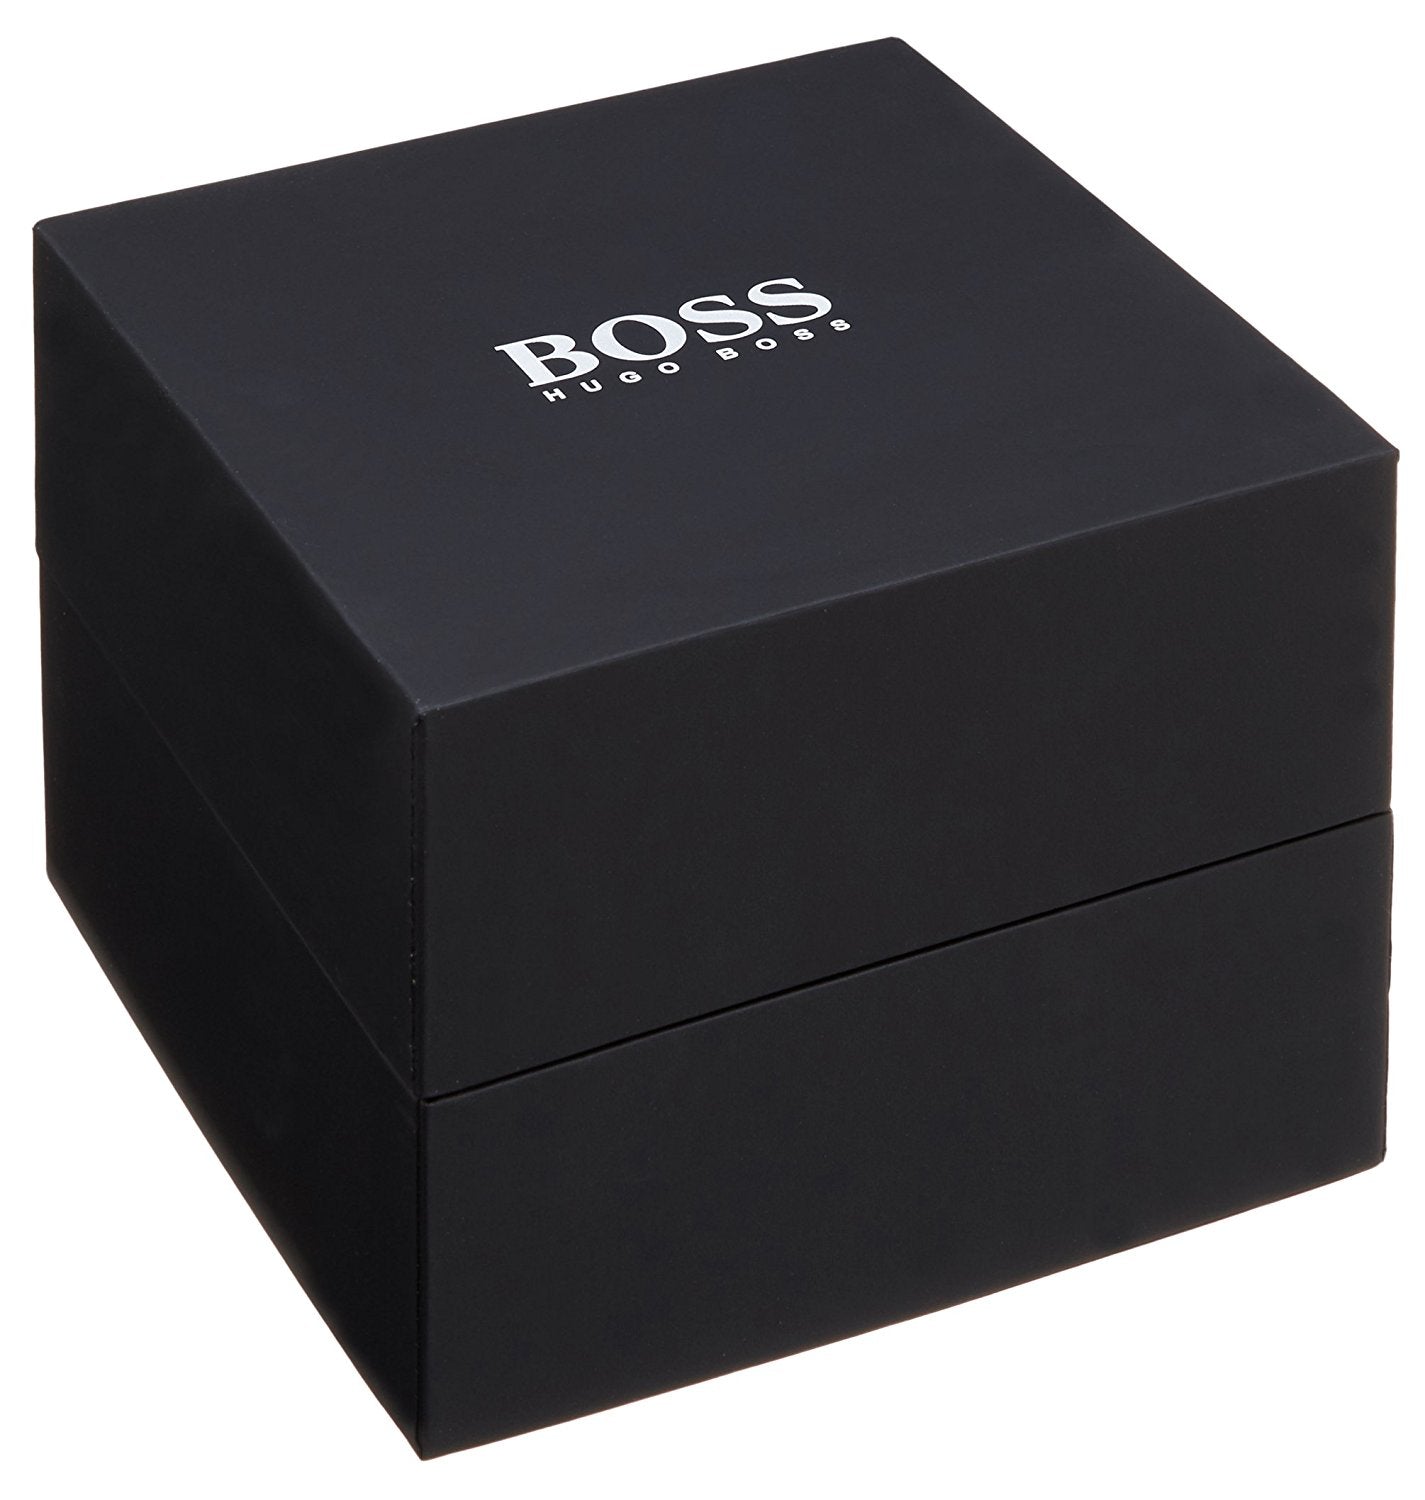 Boss GOVERNOR CLASSIC 1513488 Mens Wristwatch Classic & Simple